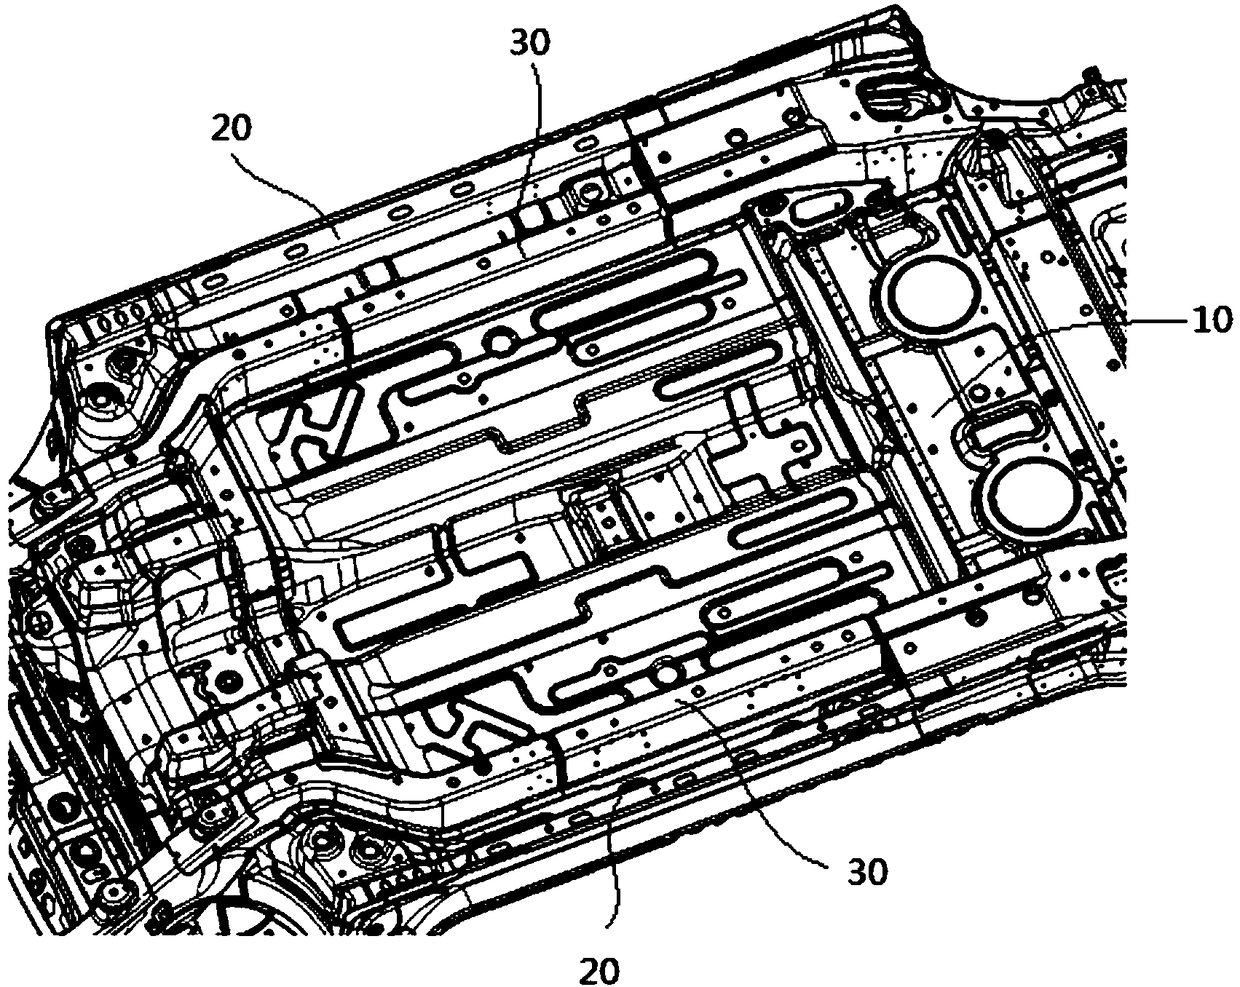 Body floor assembly and car